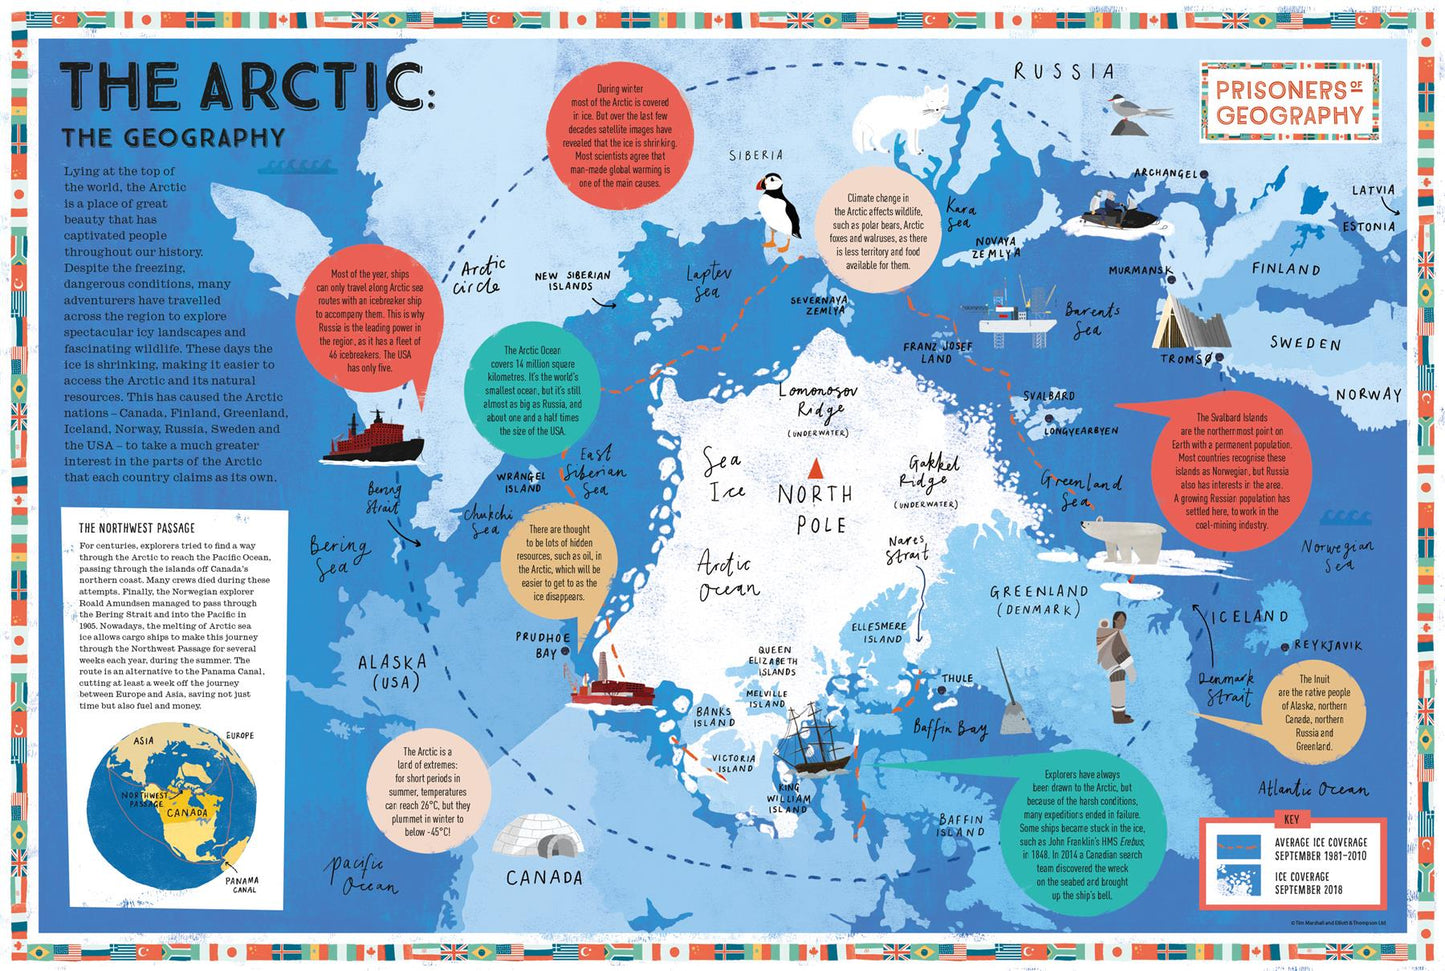 Prisoners of Geography The Arctic Educational Wall Map – Butler and Hill UK